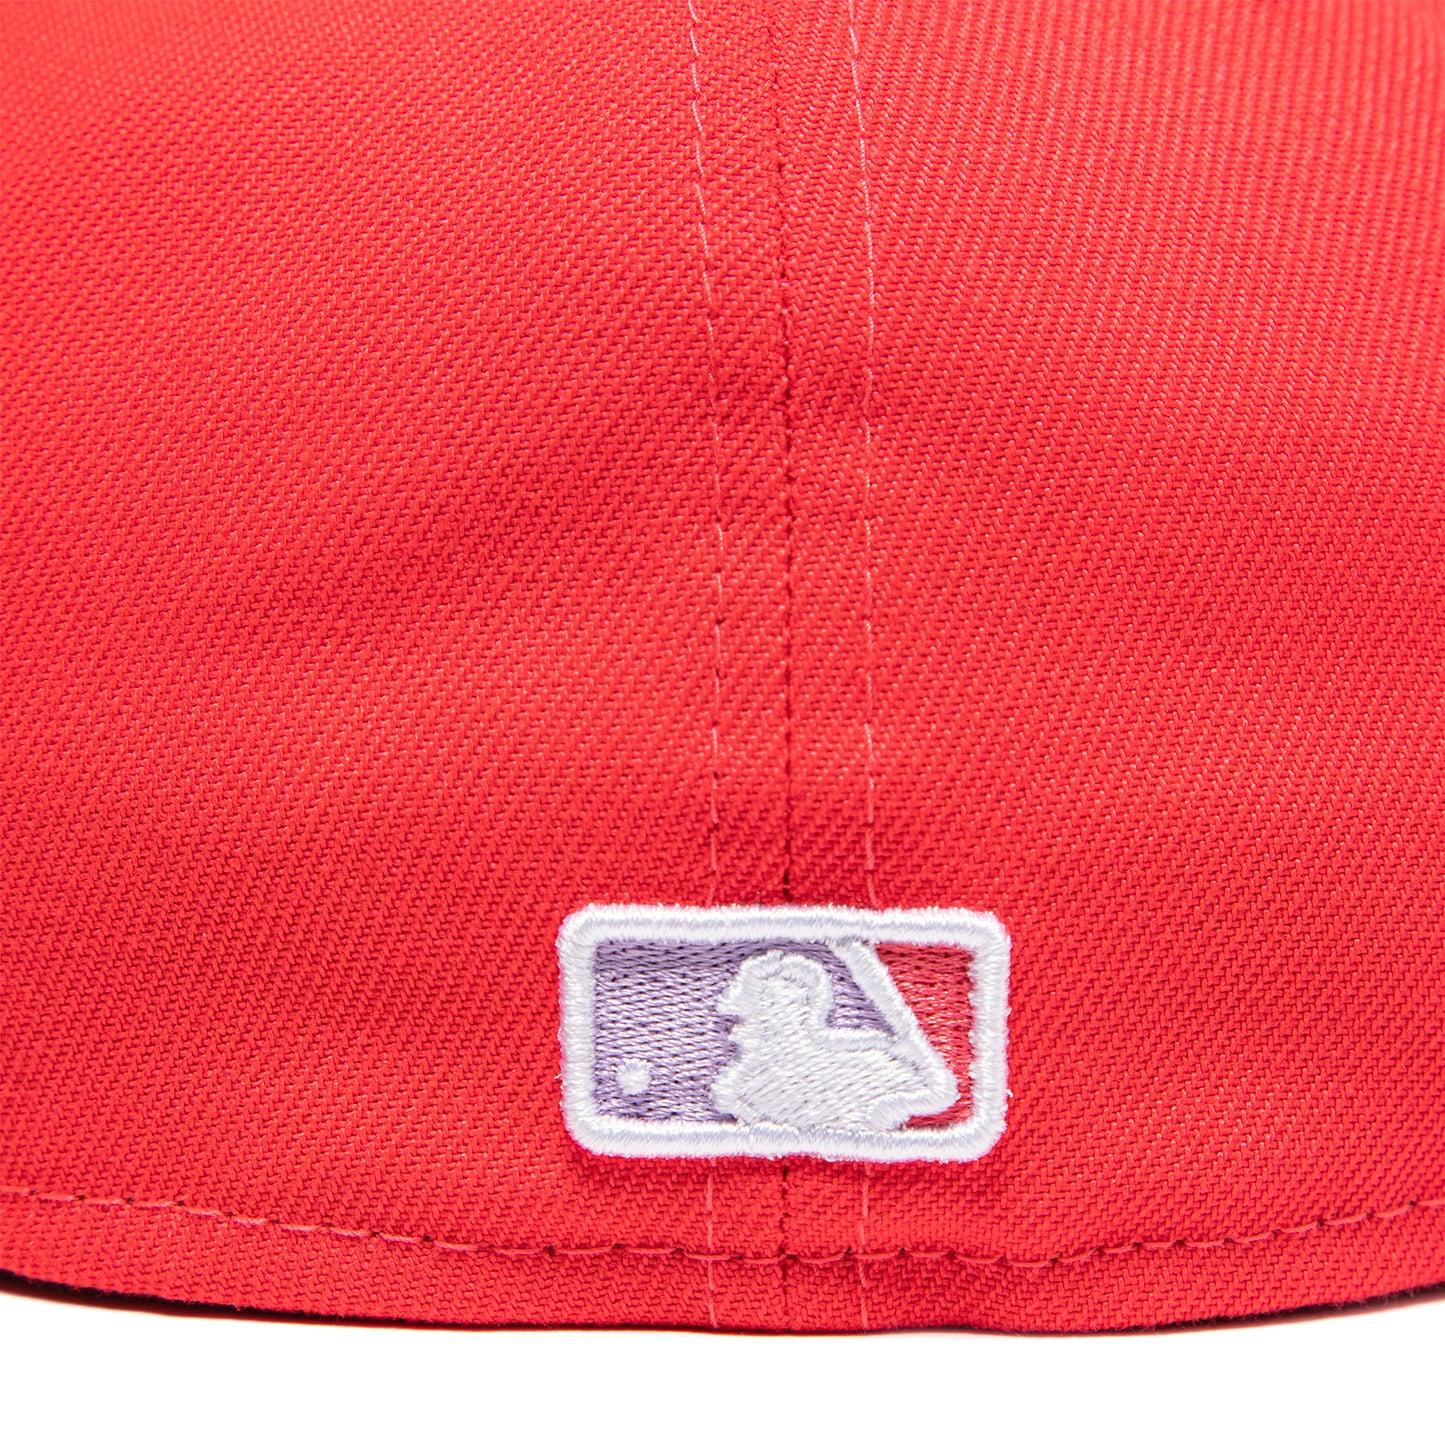 New Era New York Yankees Color Pack 59Fifty Fitted Hat (Red)